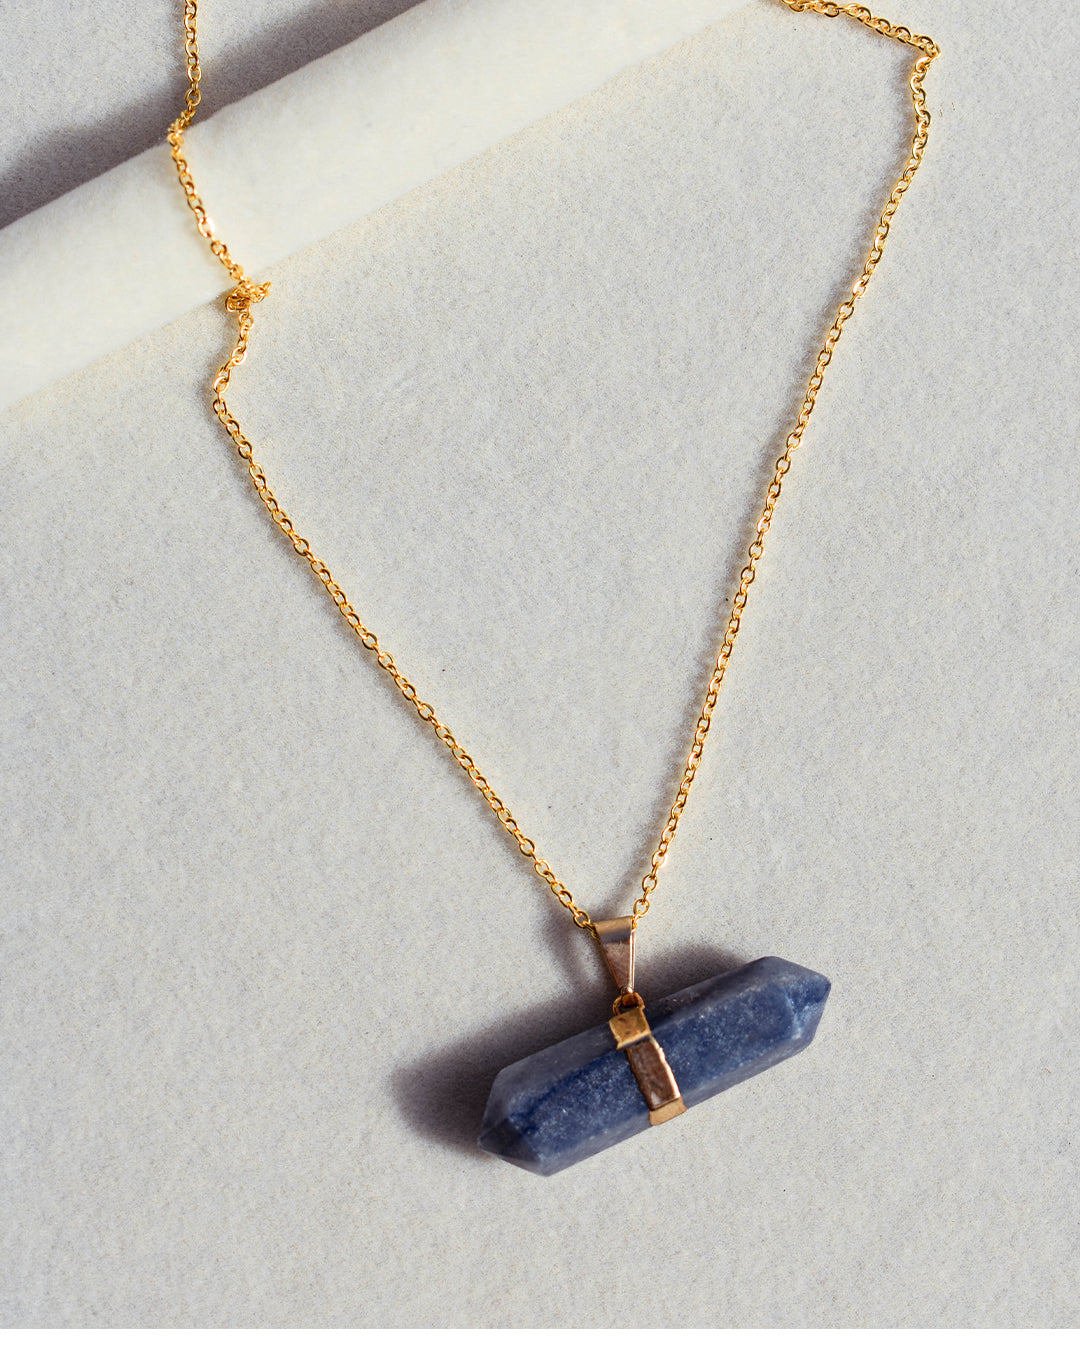 Gold Plated chain with Blue Quartz pendant